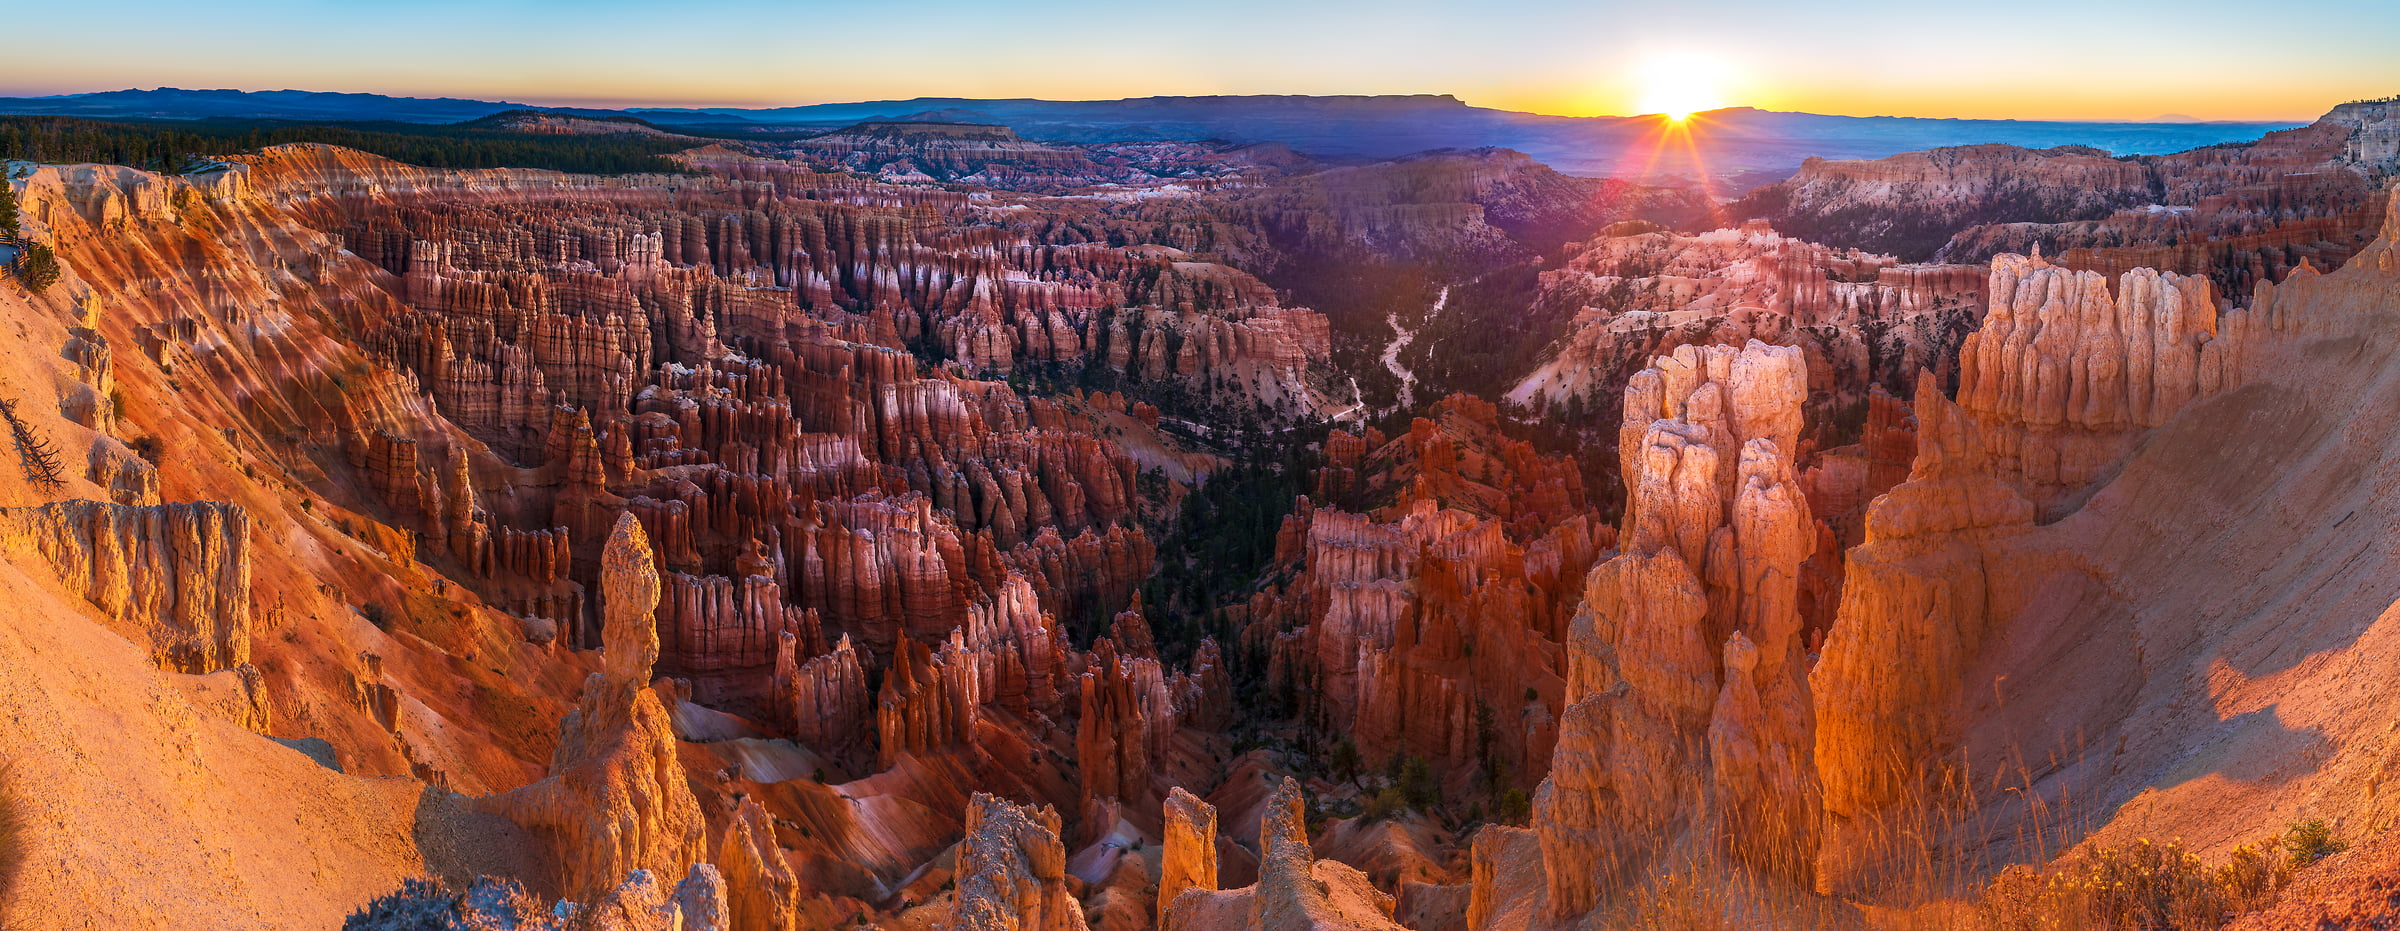 332 megapixels! A very high resolution, large-format VAST photo print of Bryce Canyon at sunrise; landscape photograph created by Jim Tarpo in Bryce Canyon, Utah.